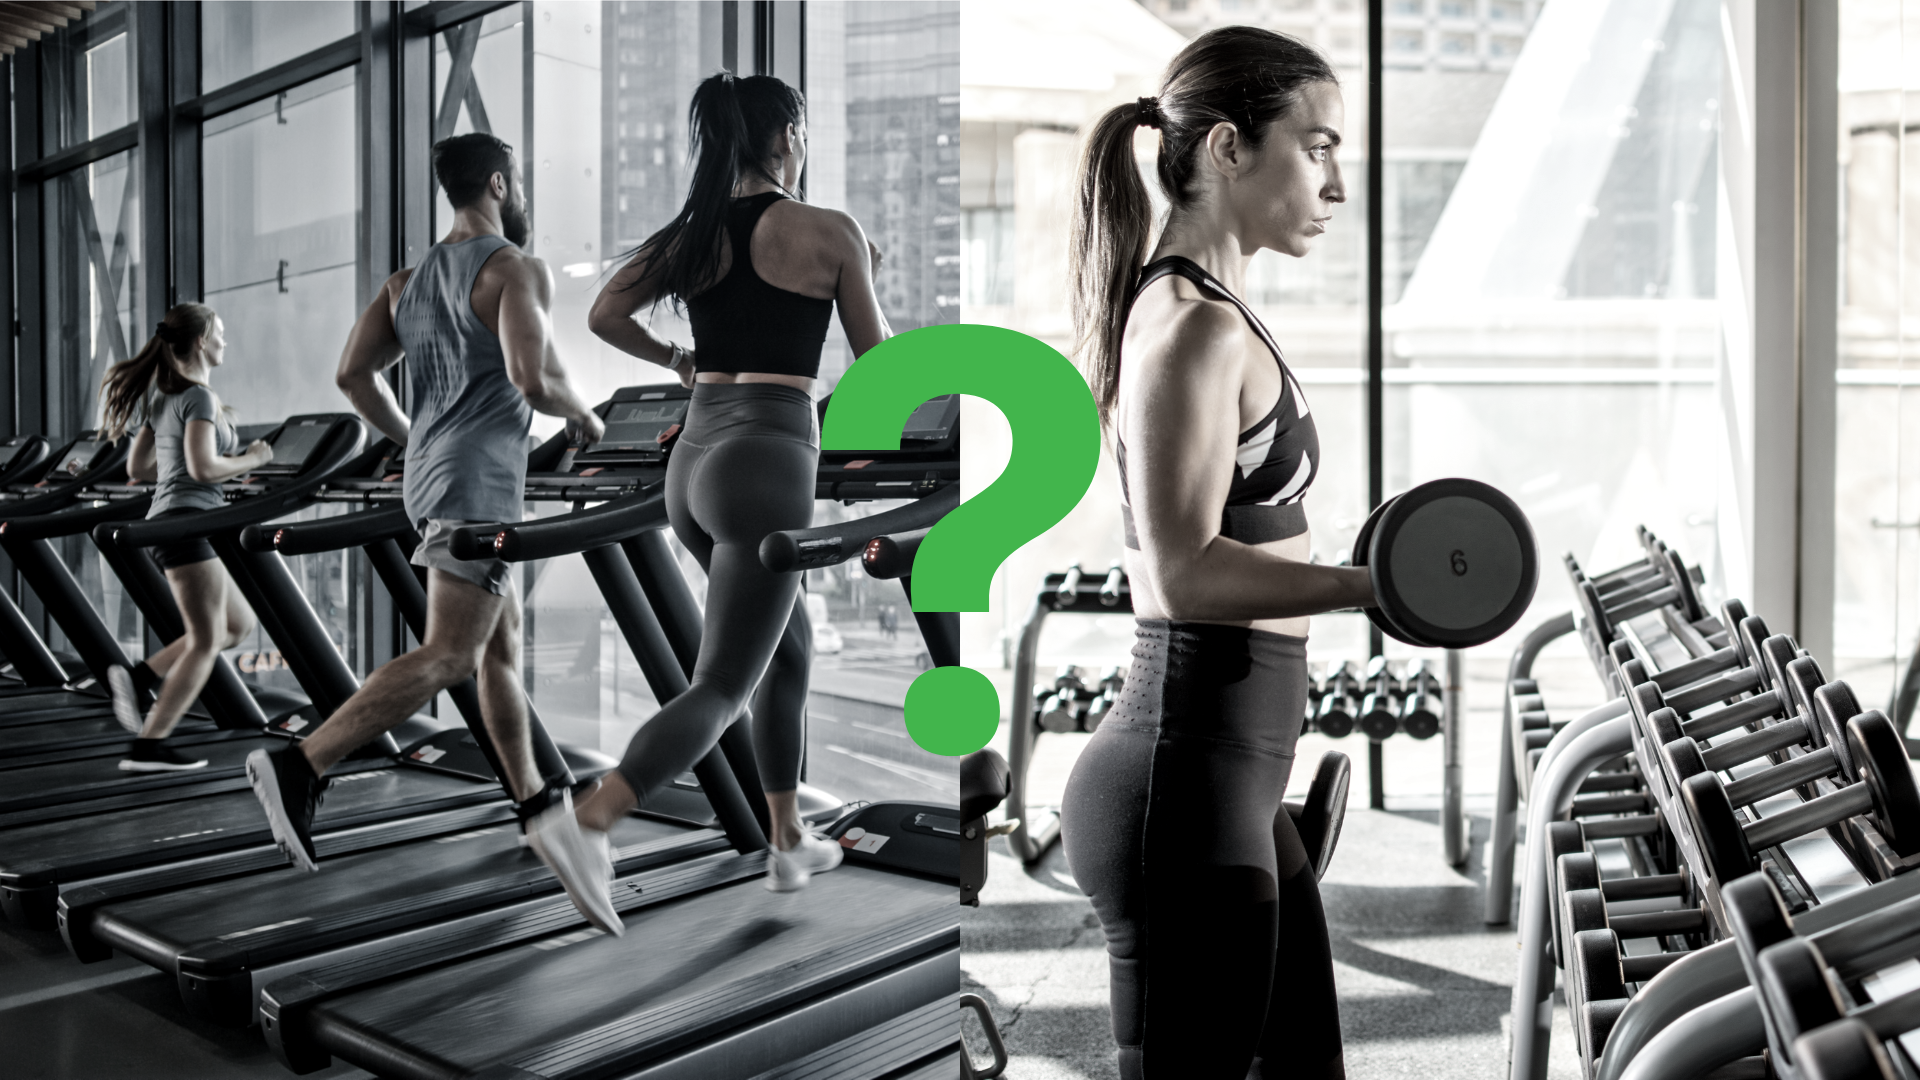  Cardio or Strength Training for Weight Loss?